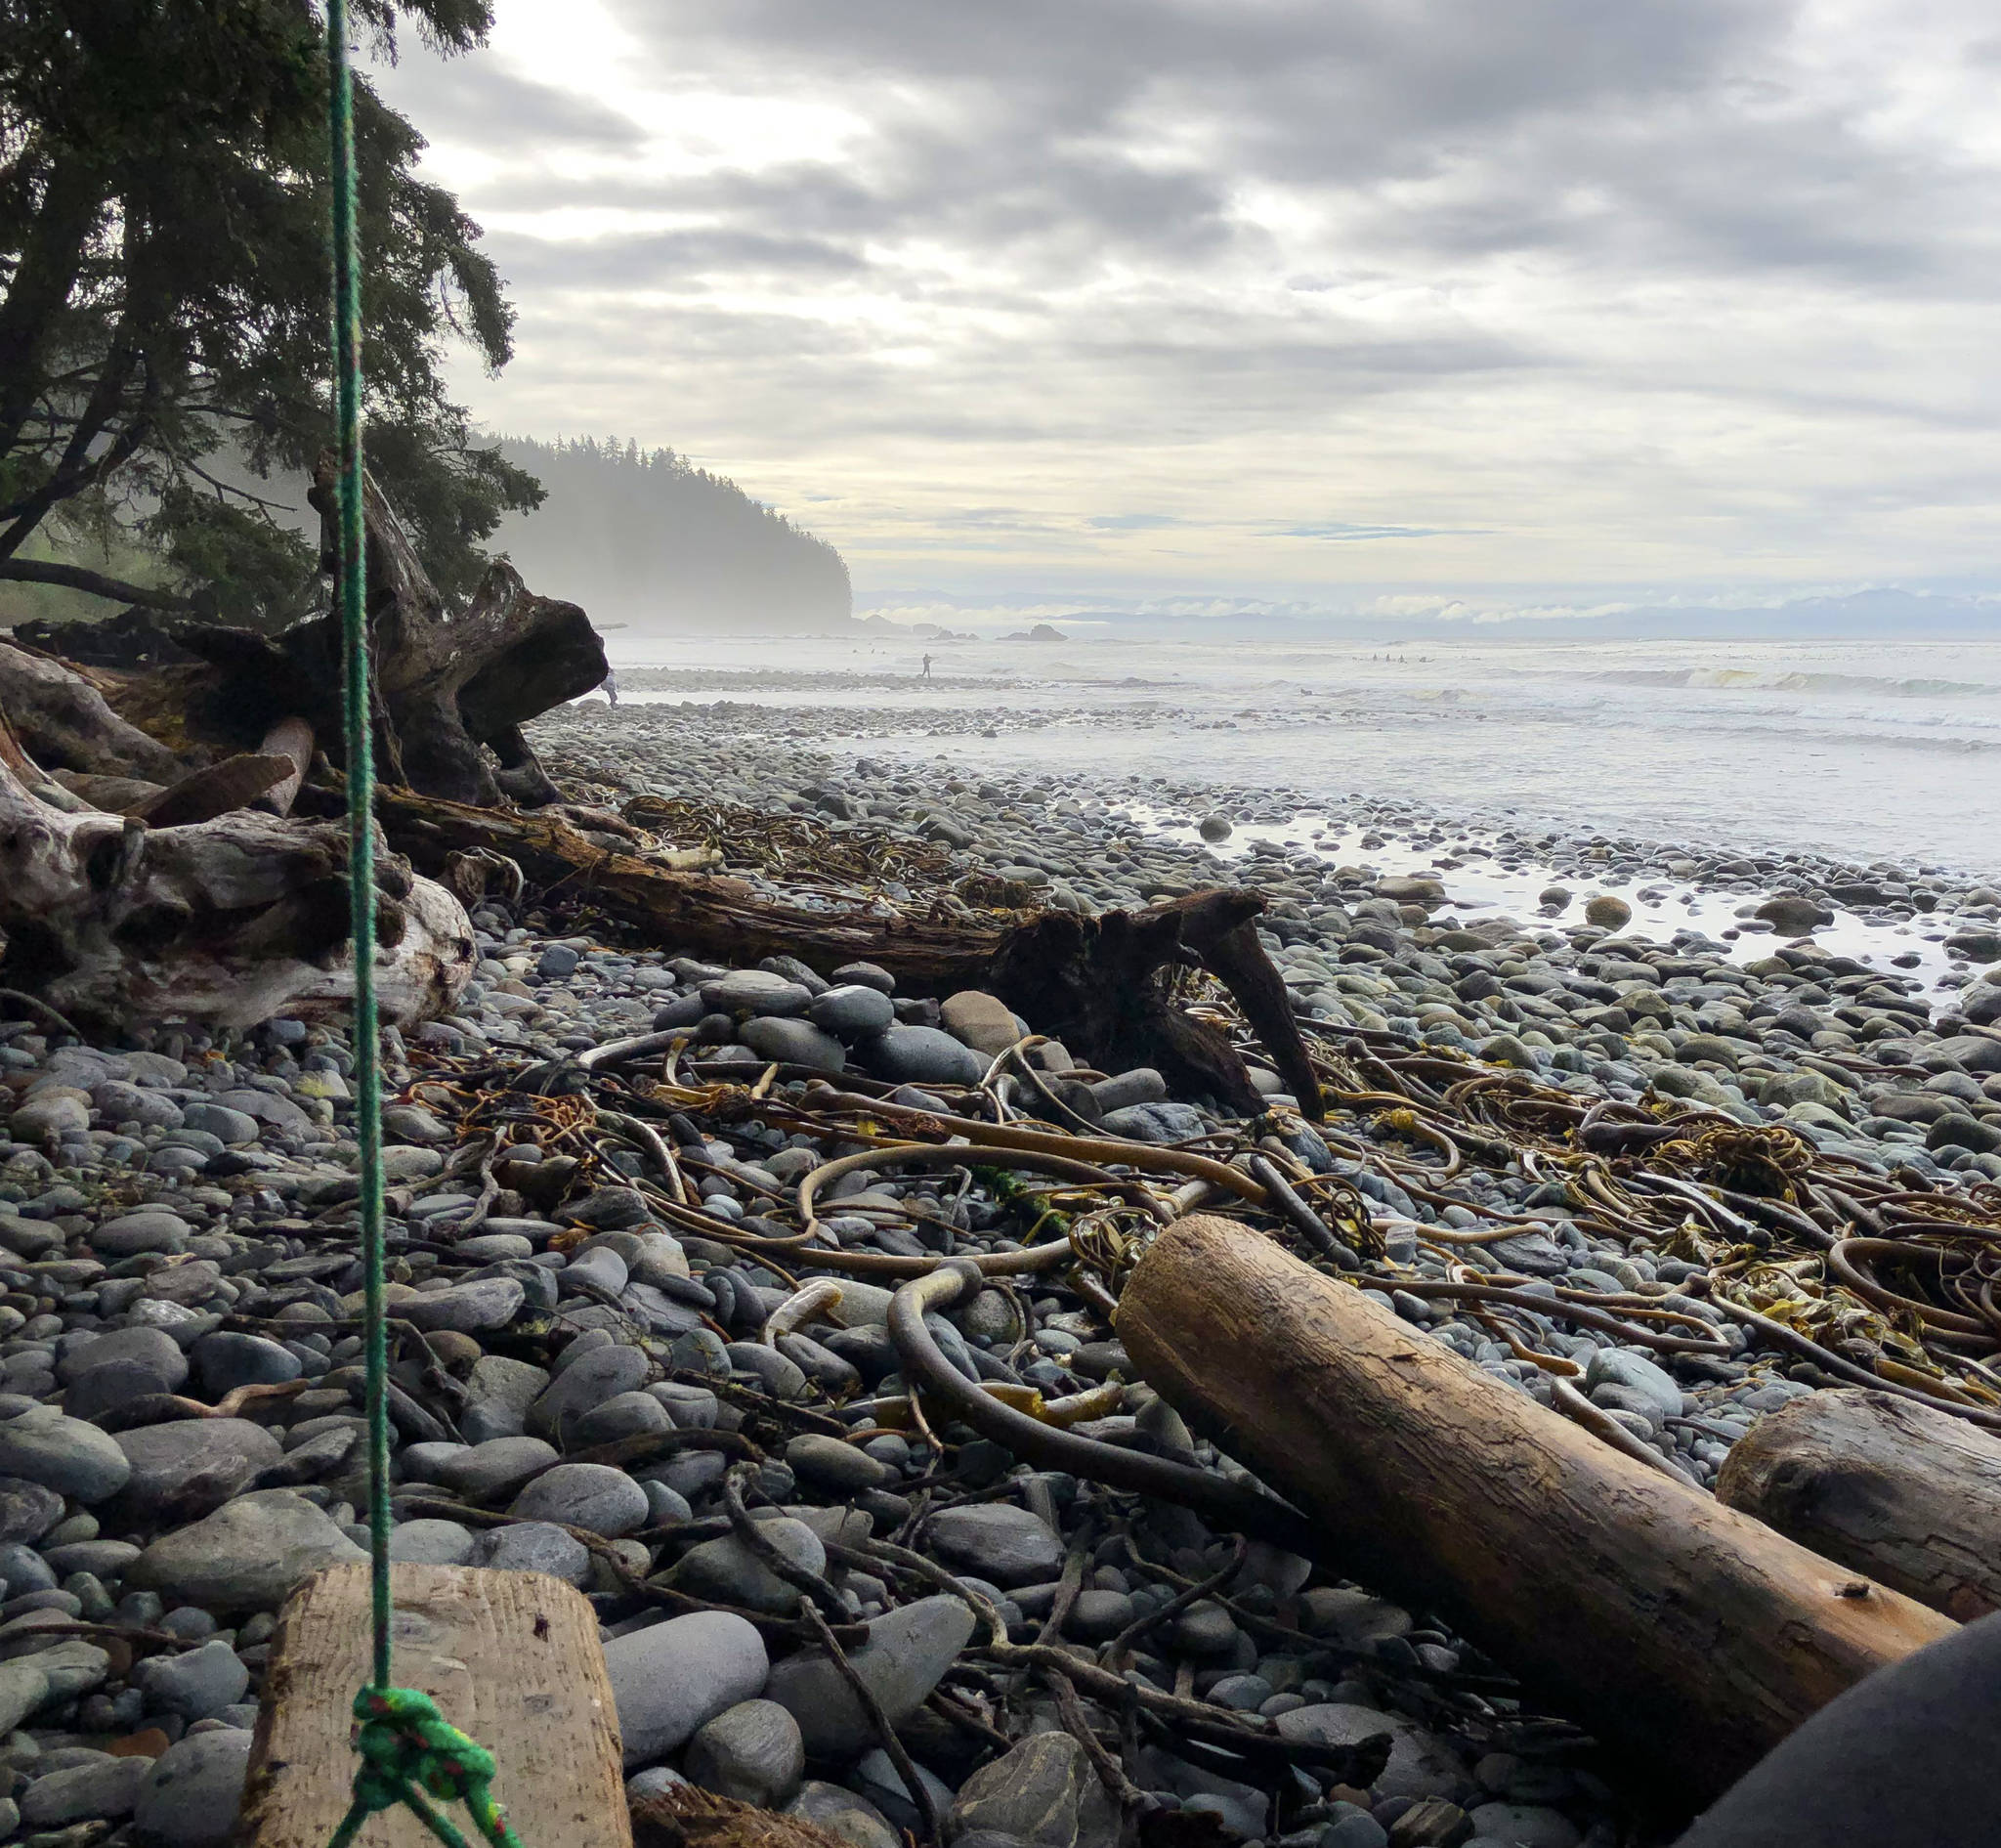 Featuring giant rocks, pounding surf and massive kelp forests, Sombrio is an excellent stop when exploring Southern Vancouver Island. Amy Attas photo.